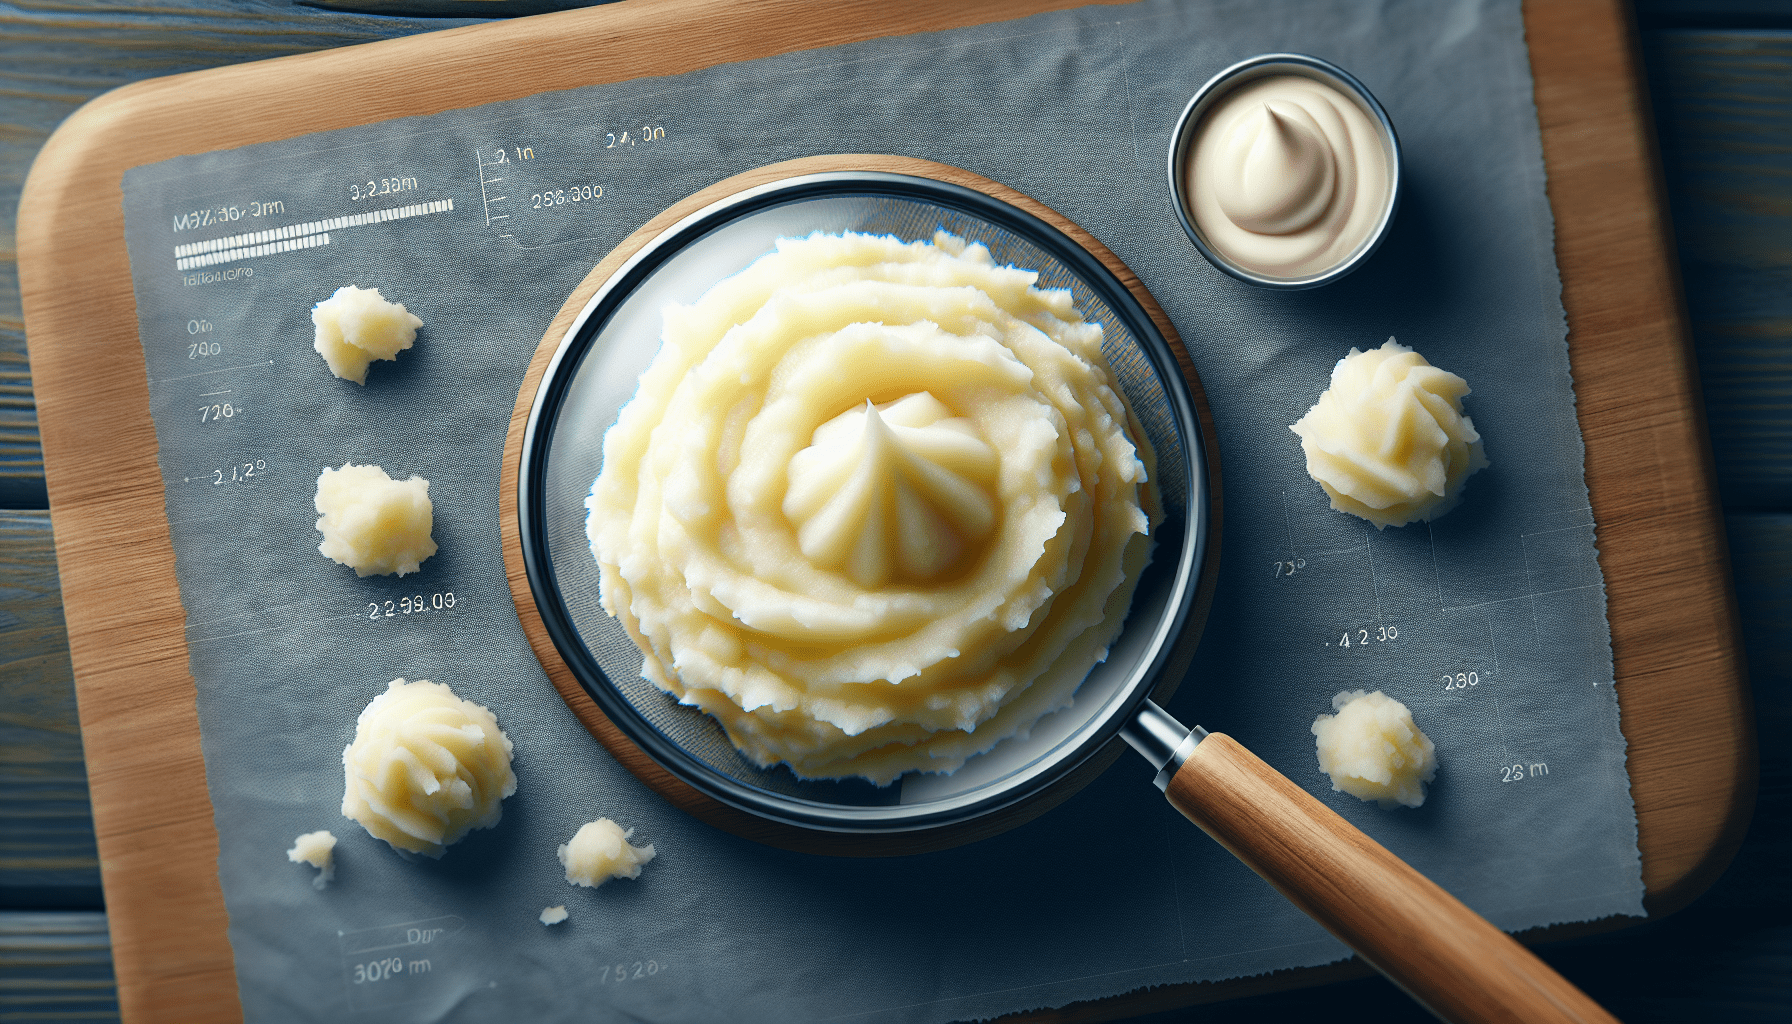 Do Mashed Potatoes Cause Inflammation?